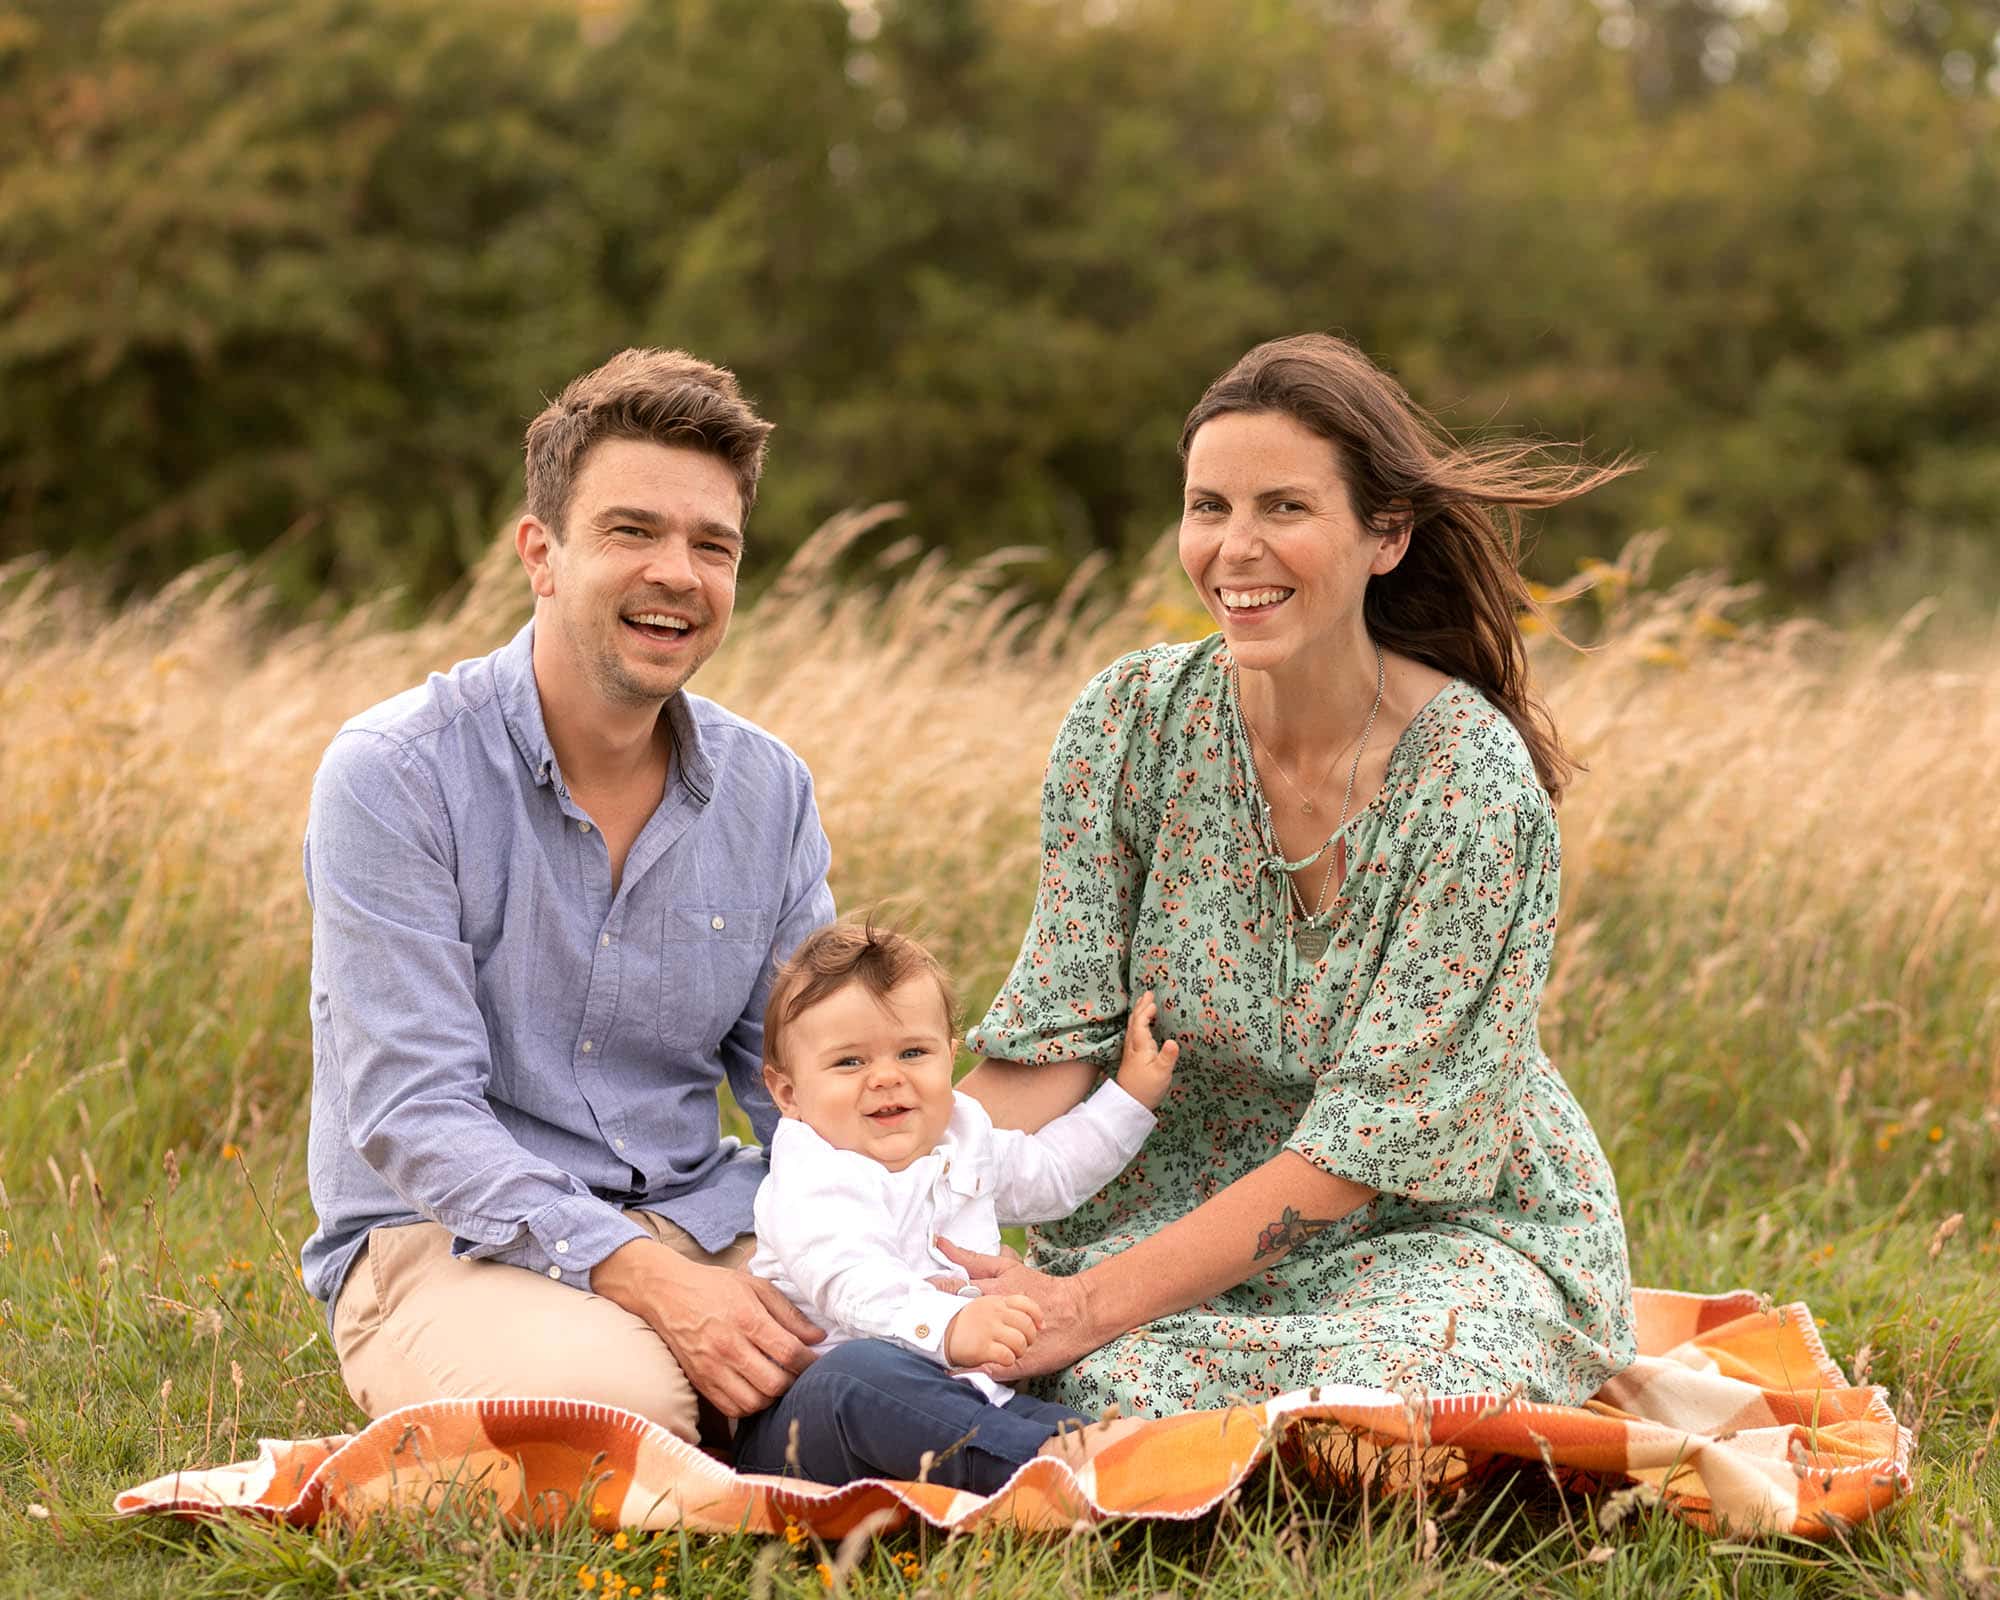 Family sat on orange checked blanket. Female wearing green floral dress. Baby wearing white shirt and blue jeans. Male adult wearing blue shirt and beige chinos. Wind blowing hair and smiling at the camera. Image taken on location in long grassy area in Glasgow by photographer Louise Ferguson